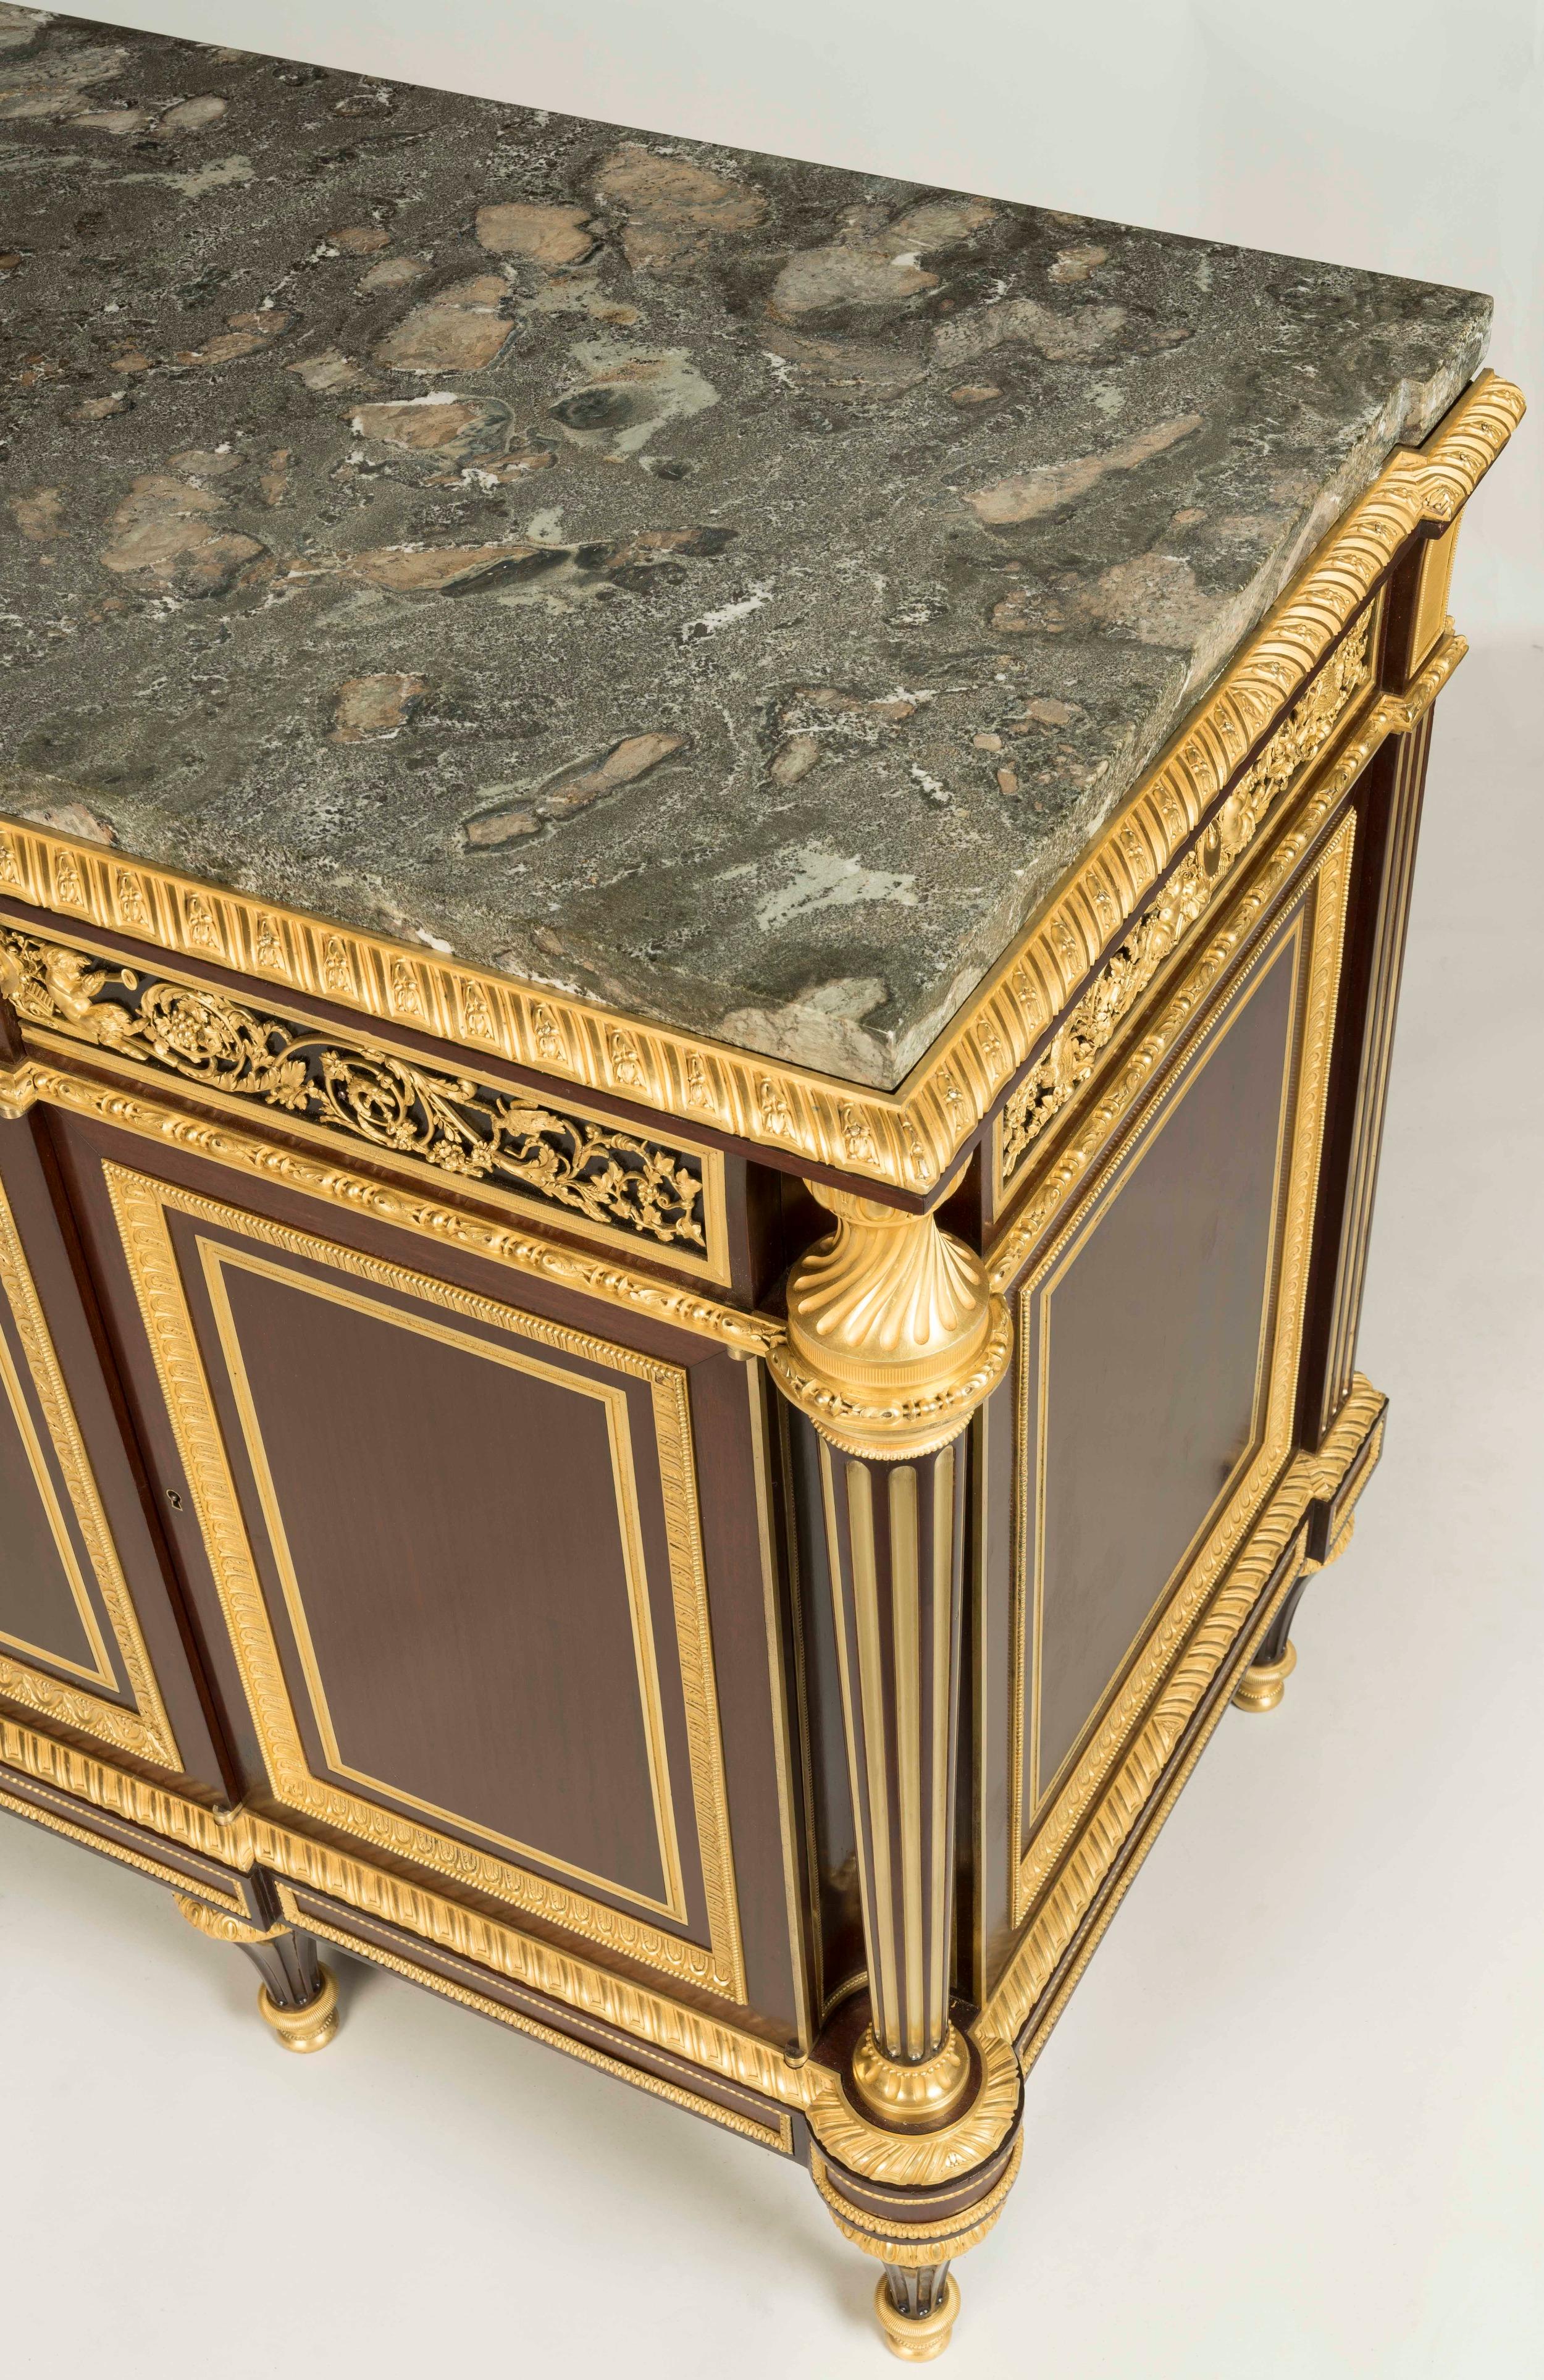 Ormolu 19th Century French Marble Top Commode in the Louis XVI Style by Henry Dasson For Sale